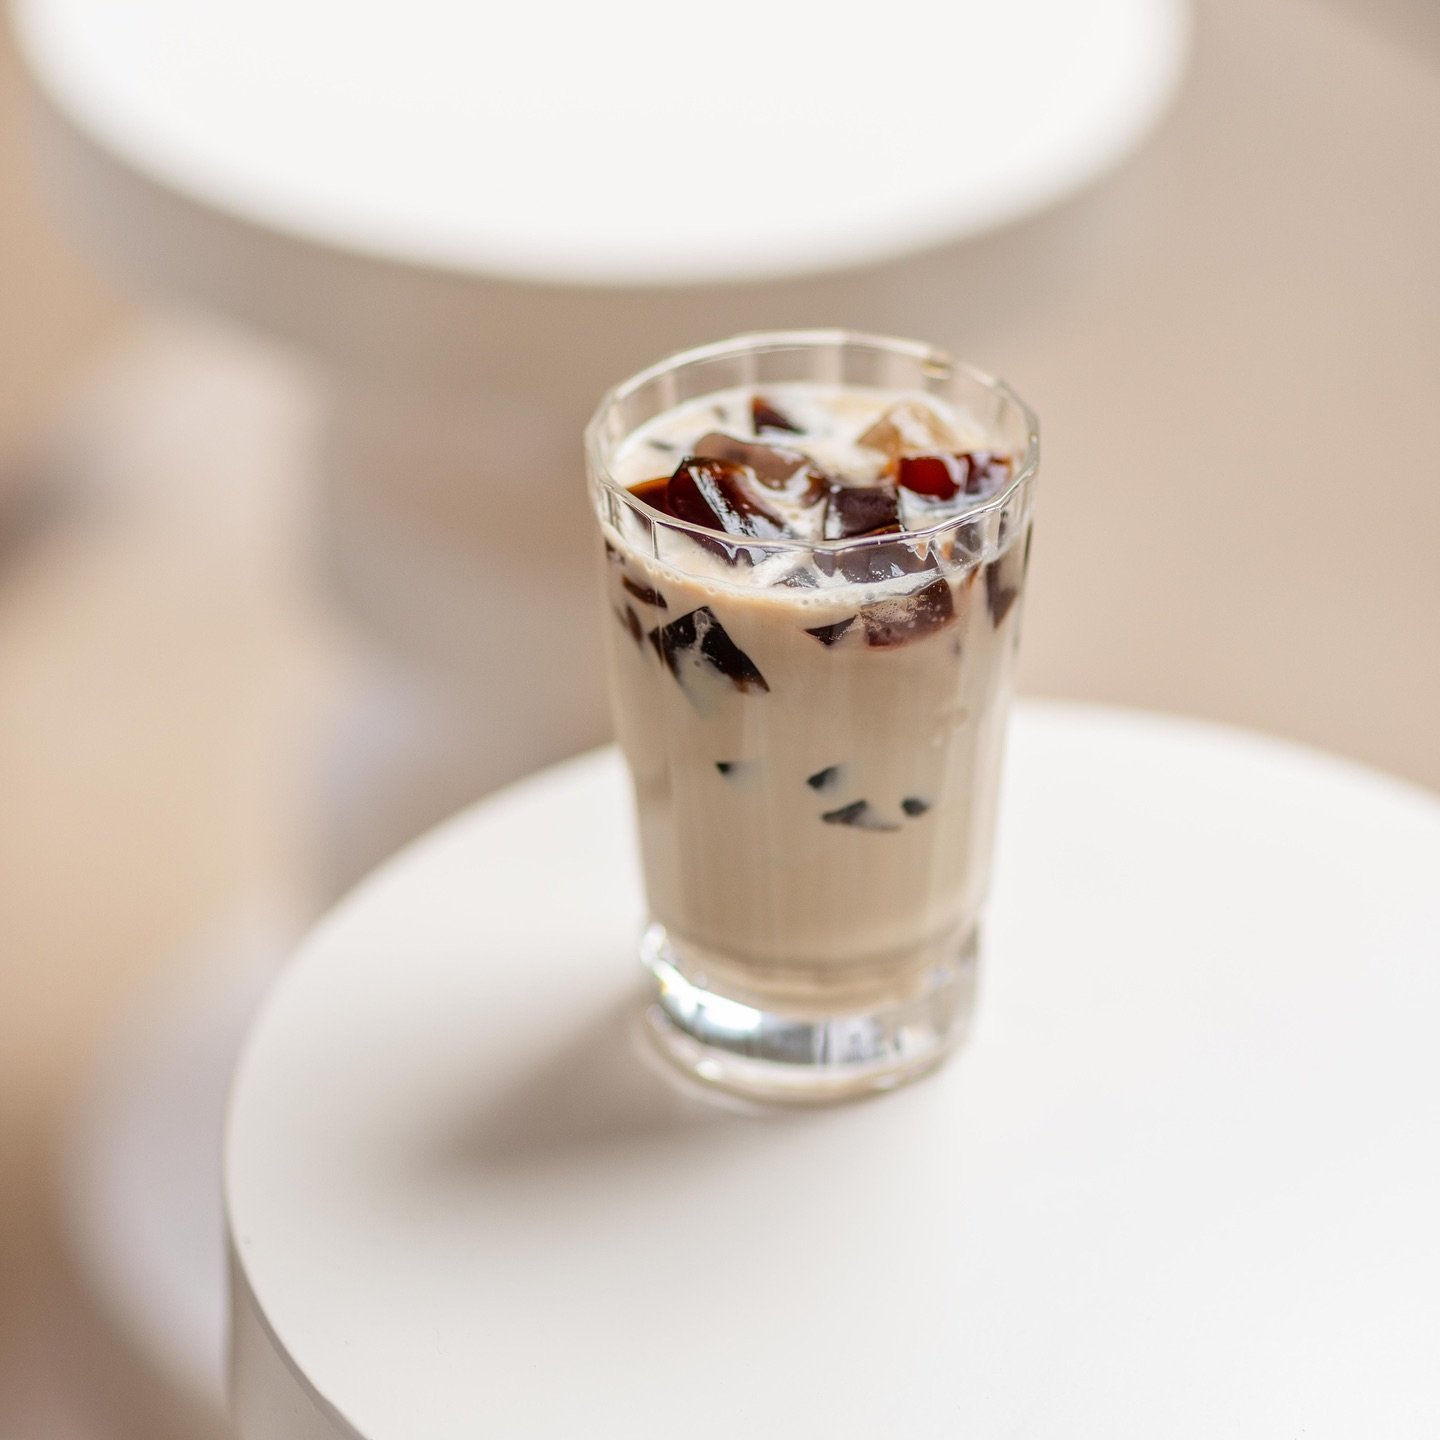 [COFFEE JELLY] Lait froid infus&eacute; au caf&eacute;, gel&eacute;e de caf&eacute; 

📷 : @thetravelbuds

#kapeparis #filipinofood #paris #coffeeshop #asiancoffeeshop #coffeeshopasiatique #philippines #caf&eacute; #coffeejelly